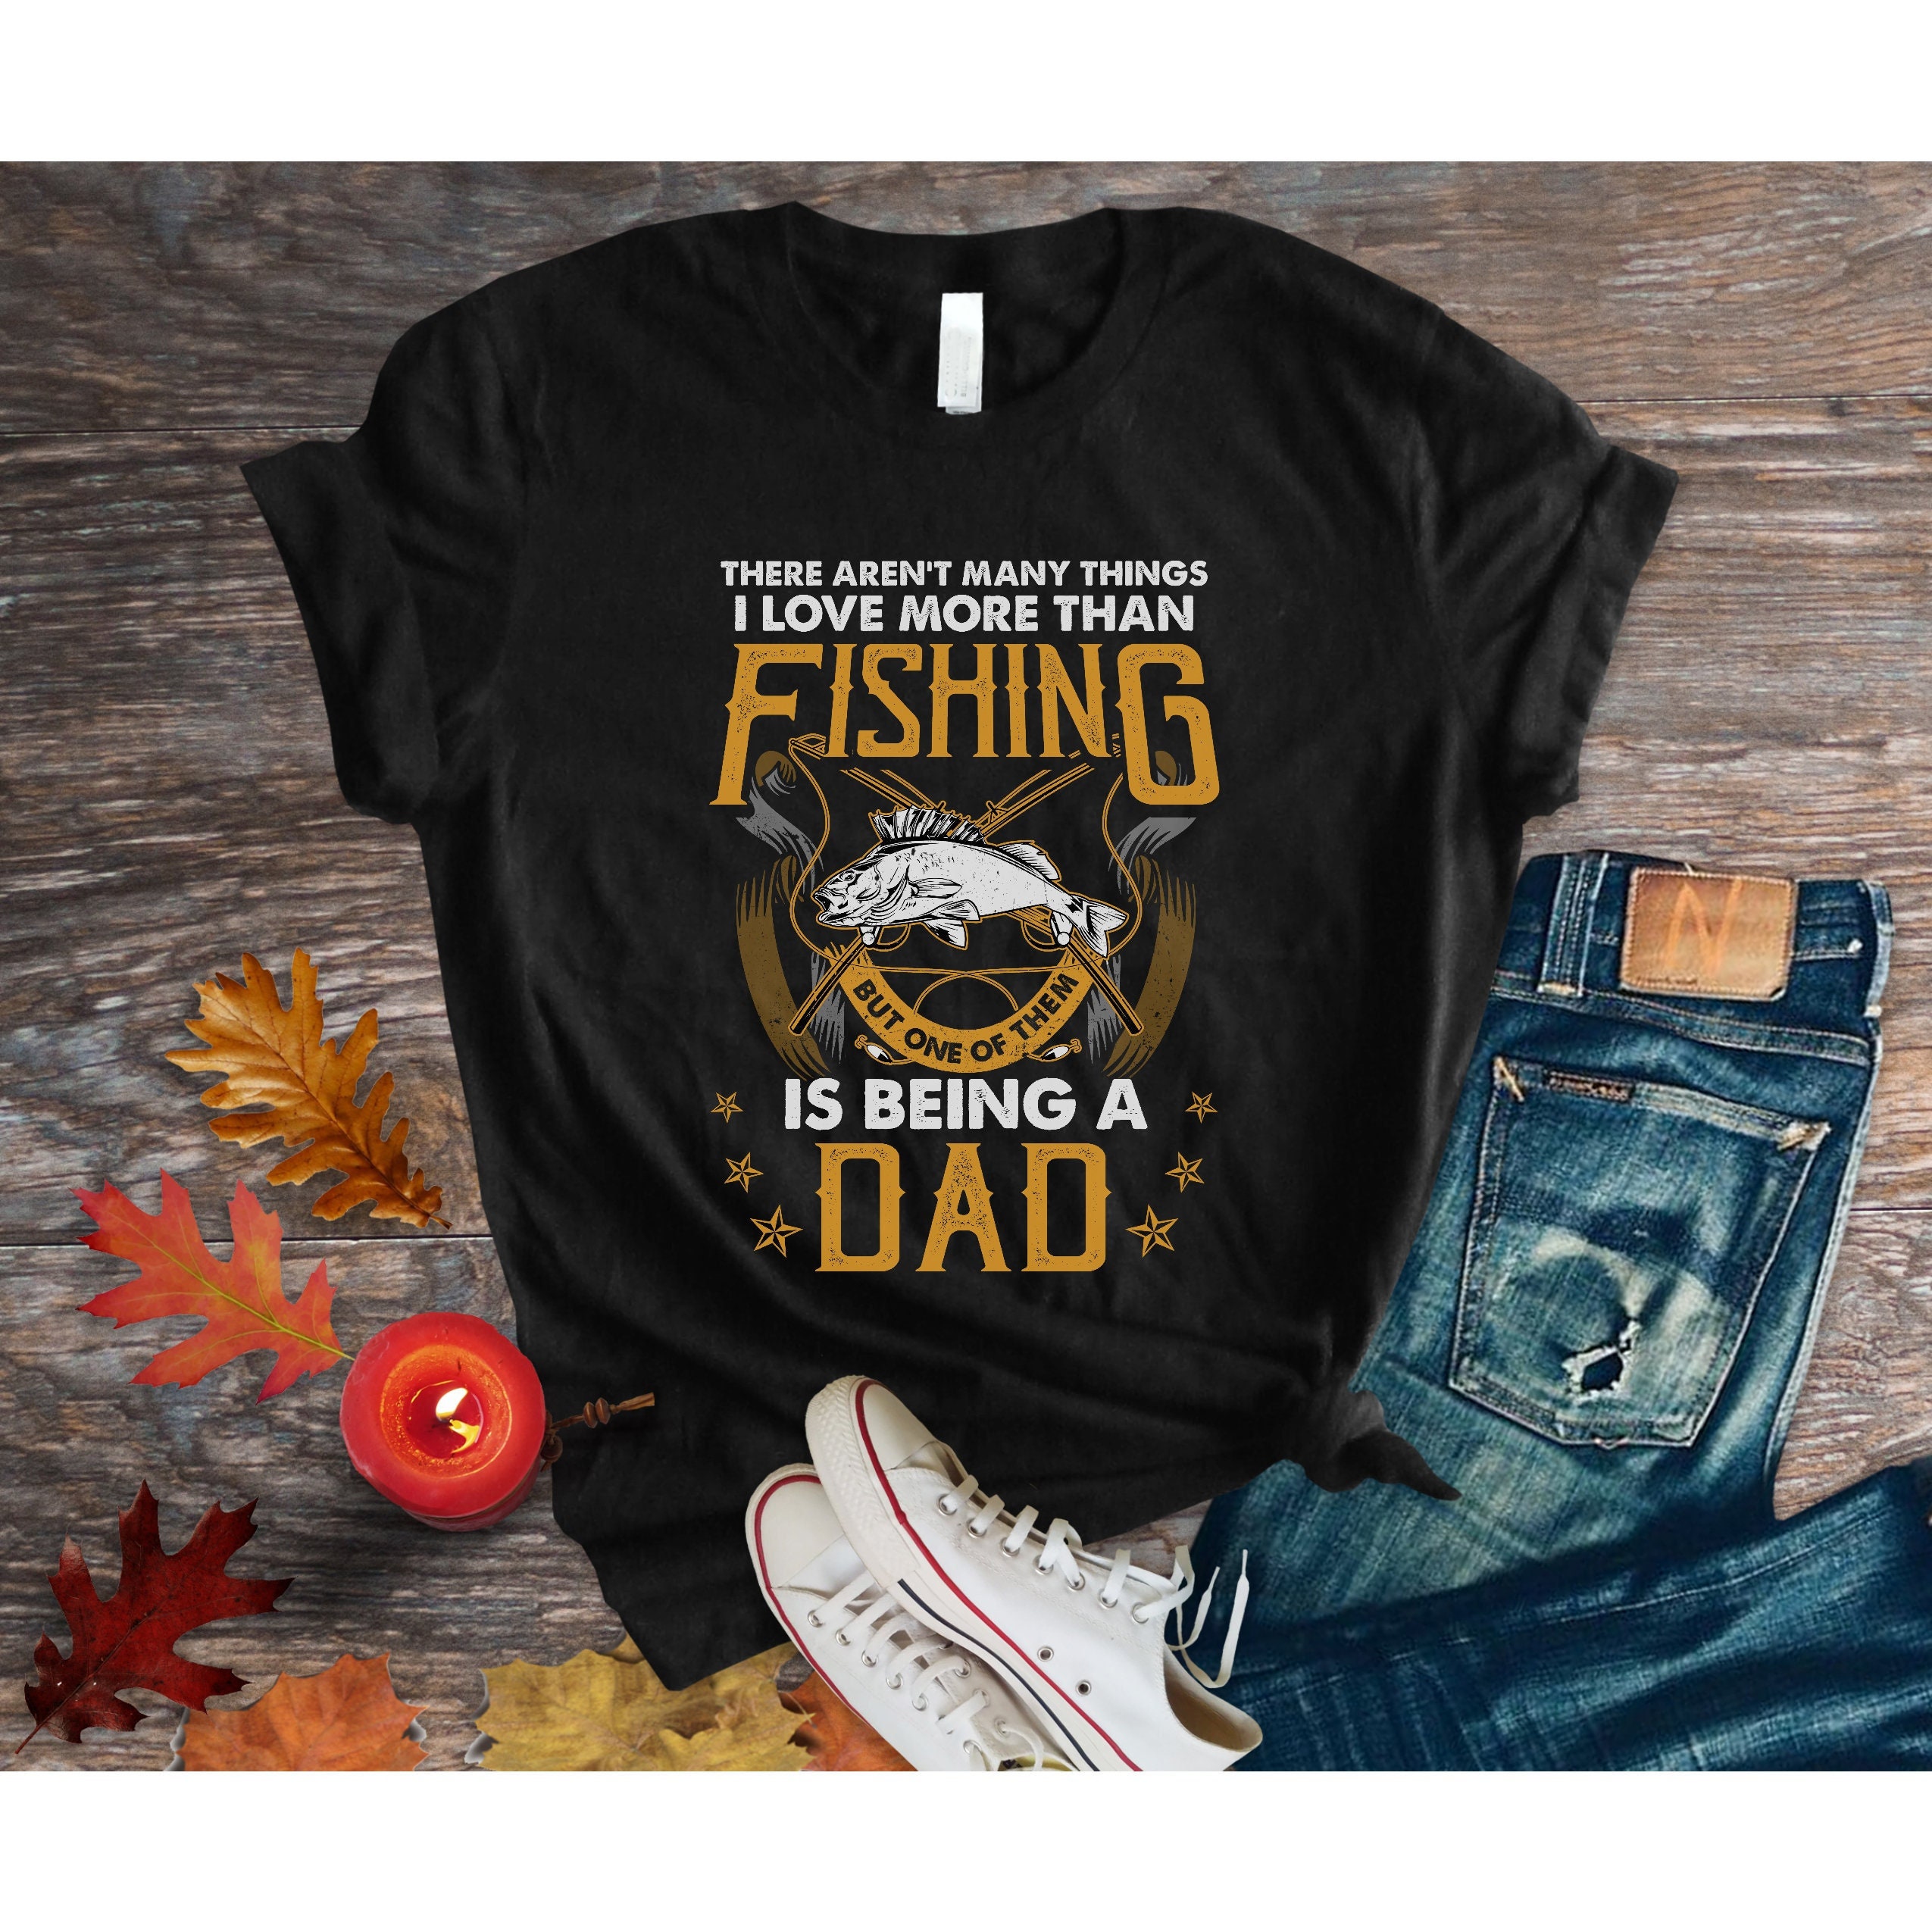 Fishing Dad T-shirt, Cool Dad Tee, Shirt For Dad, Gift for Dad, Father  Figure, Male Role Model